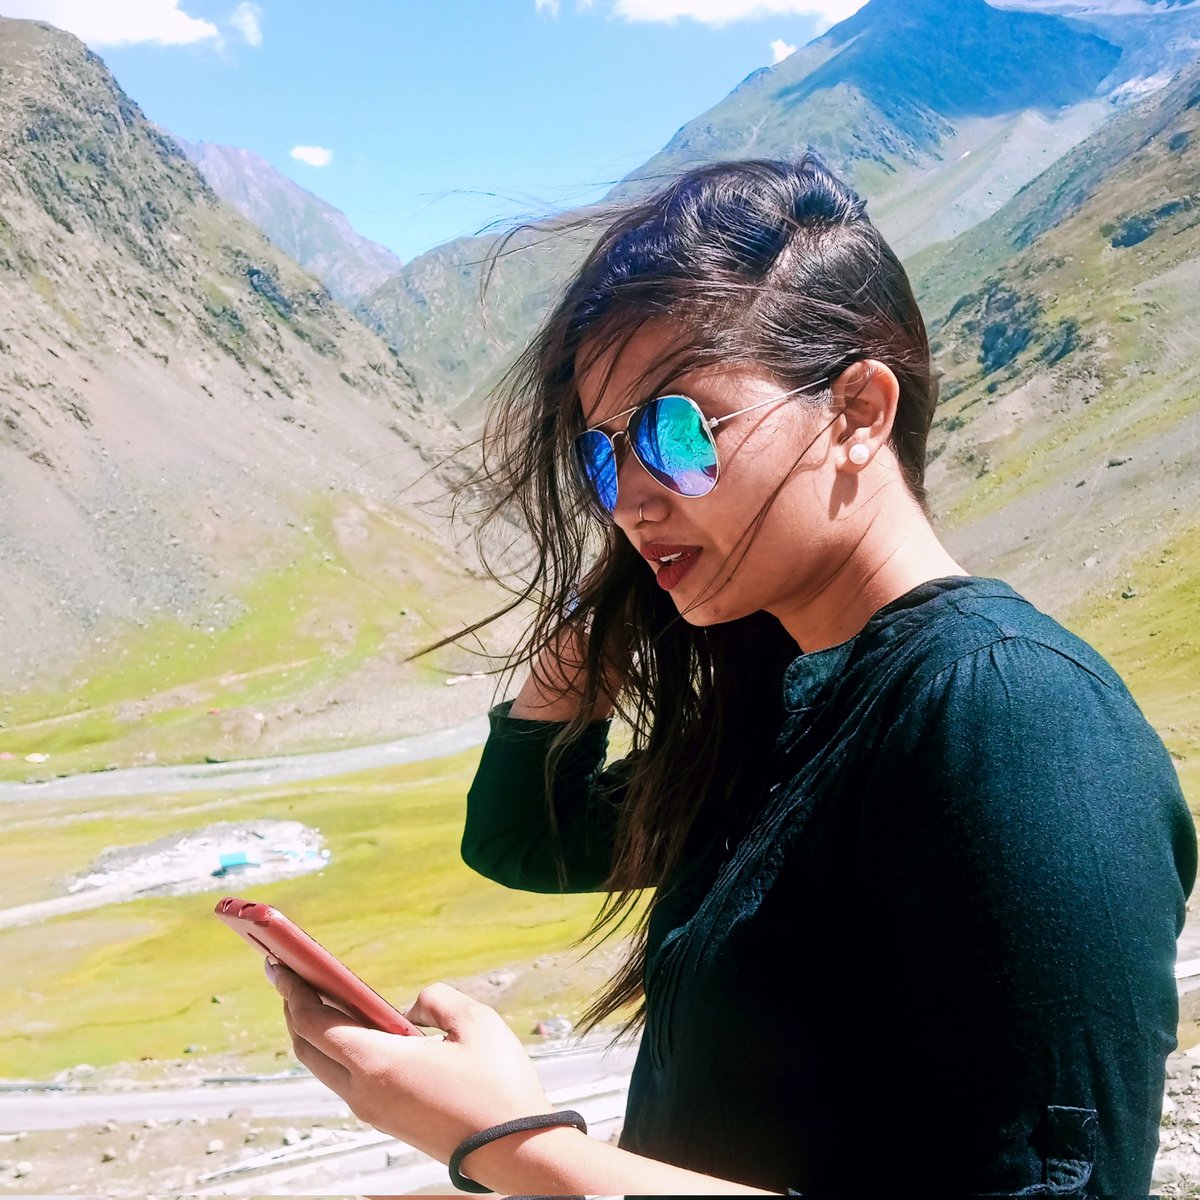 Sunshine and scrolling 🌞📱 This woman knows how to enjoy a beautiful day while staying connected. #TechSavvy #OnTheGo #SunglassesStyle #DigitalNomad #SocialMediaAddict #Drassvalley #Kargil
#NewProfilePic